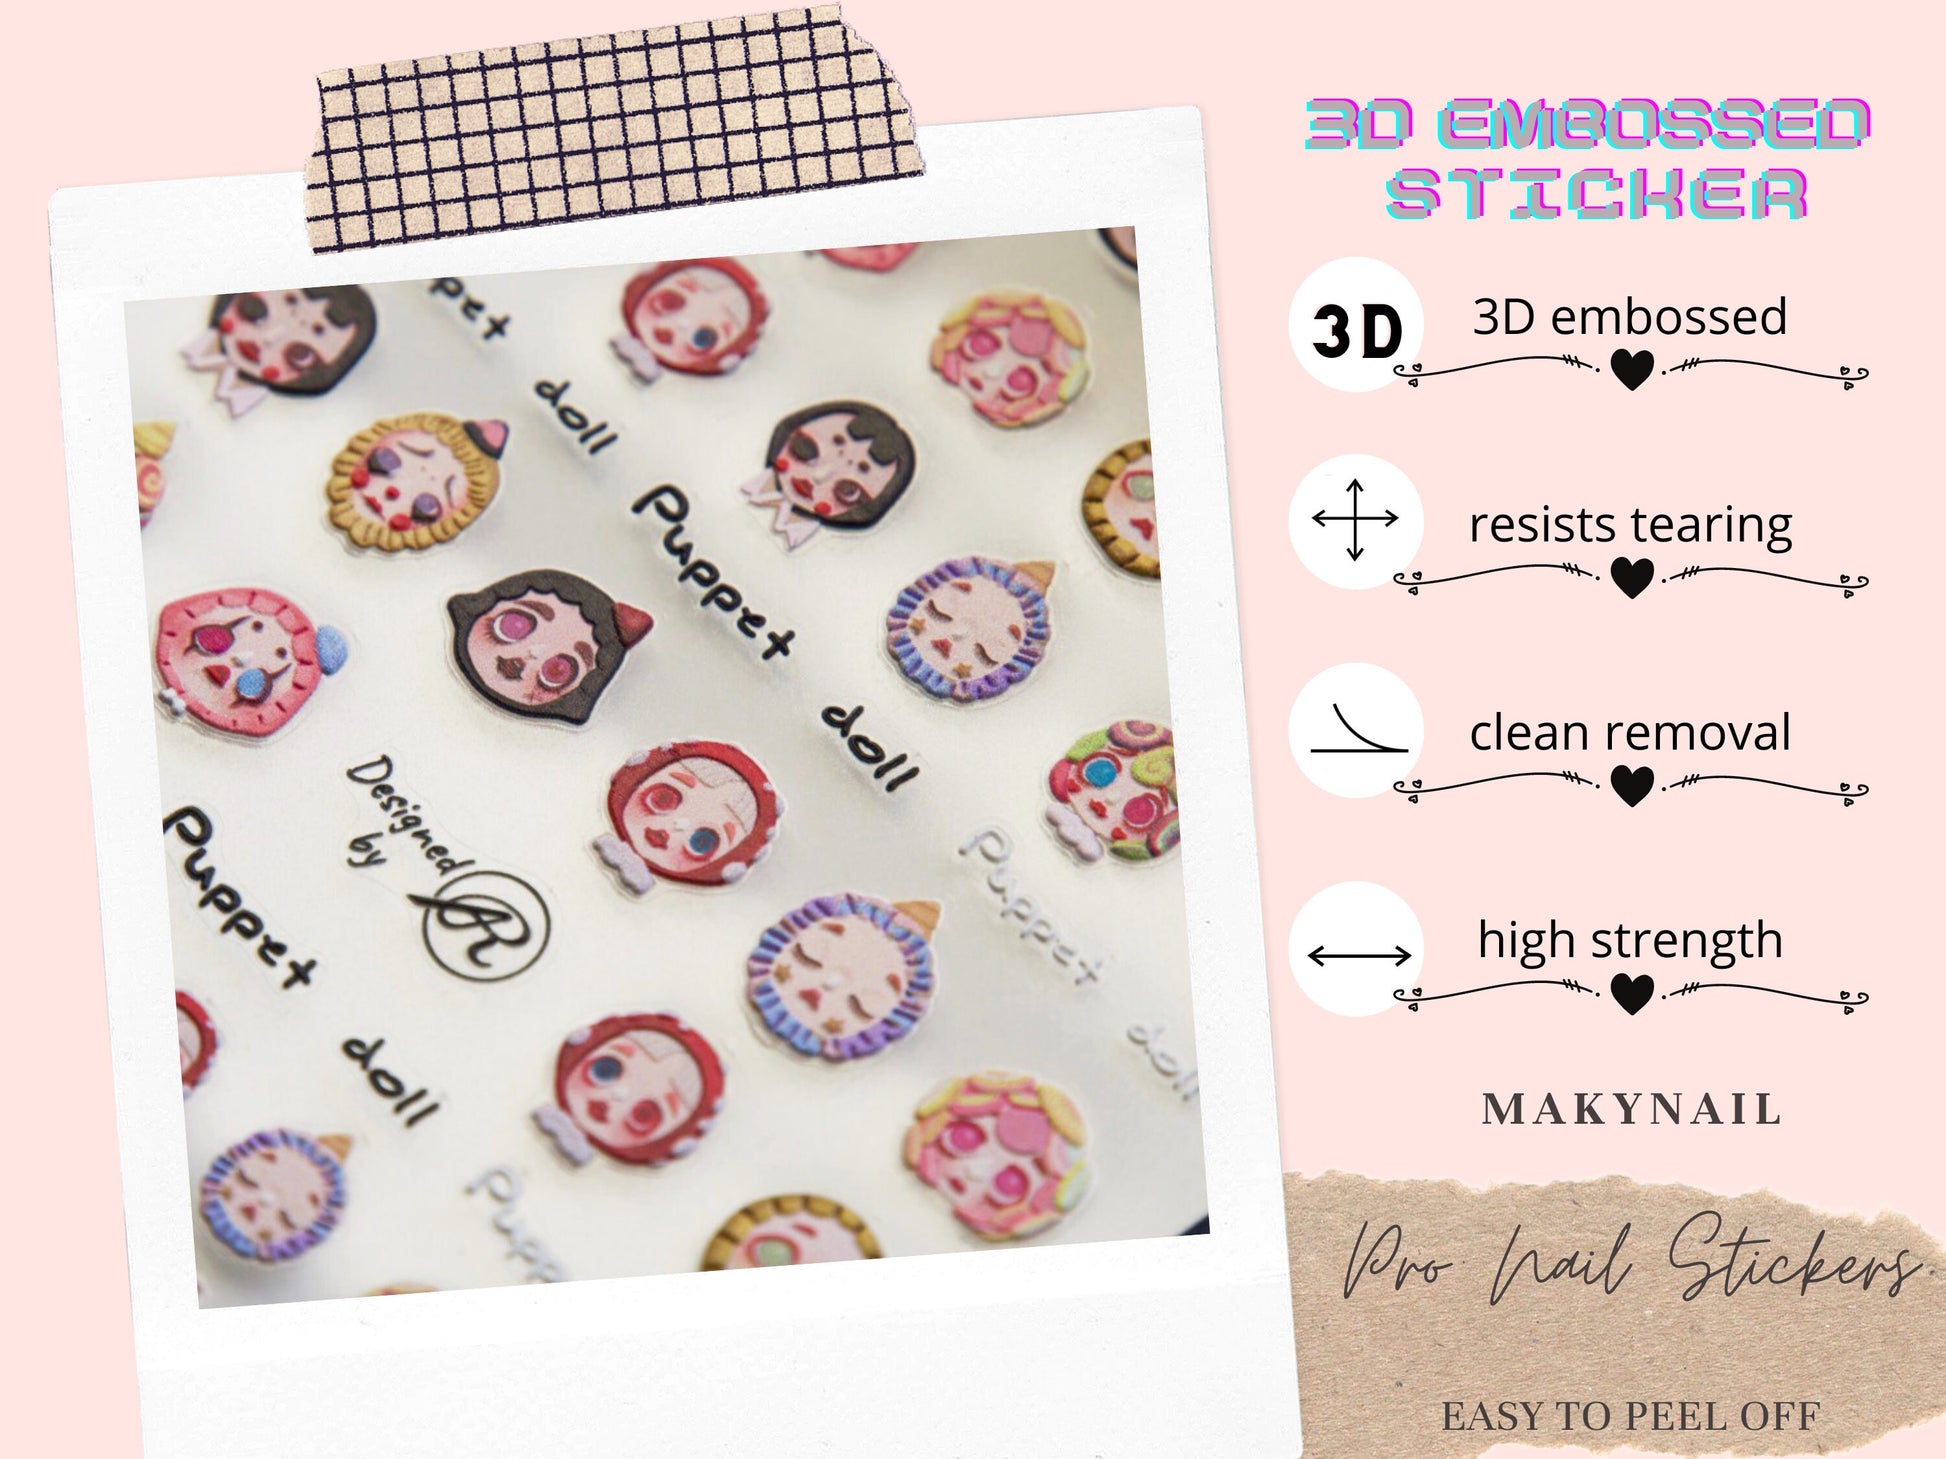 Pop Art girls Nail Art Sticker/ 3D Chibi DIY Tips Guides peel off  Stickers/Blind Box Toy Collection series Mange Anime Girls Nails